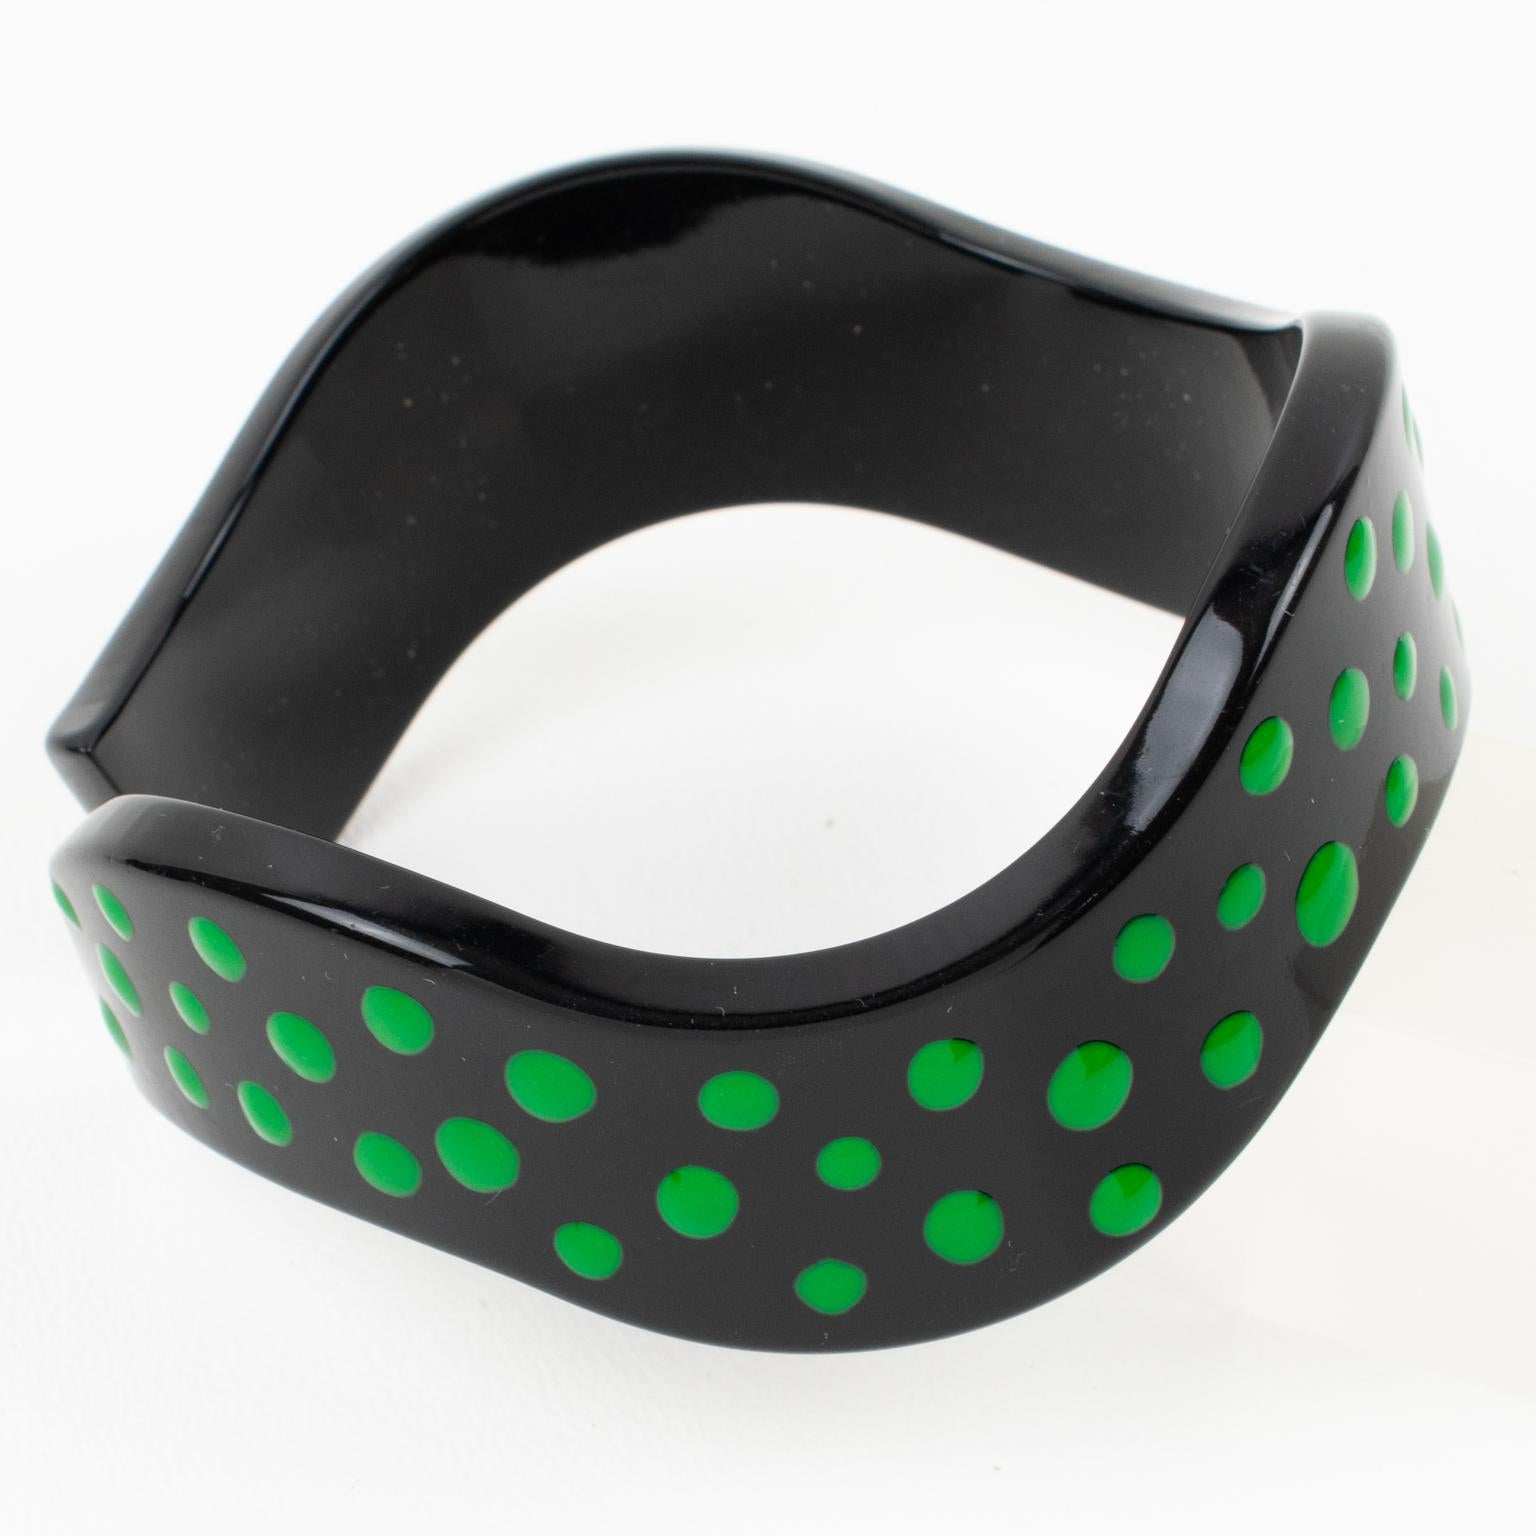 Missoni Black Lucite Resin Bracelet Bangle Purple and Green Dots, a pair For Sale 7